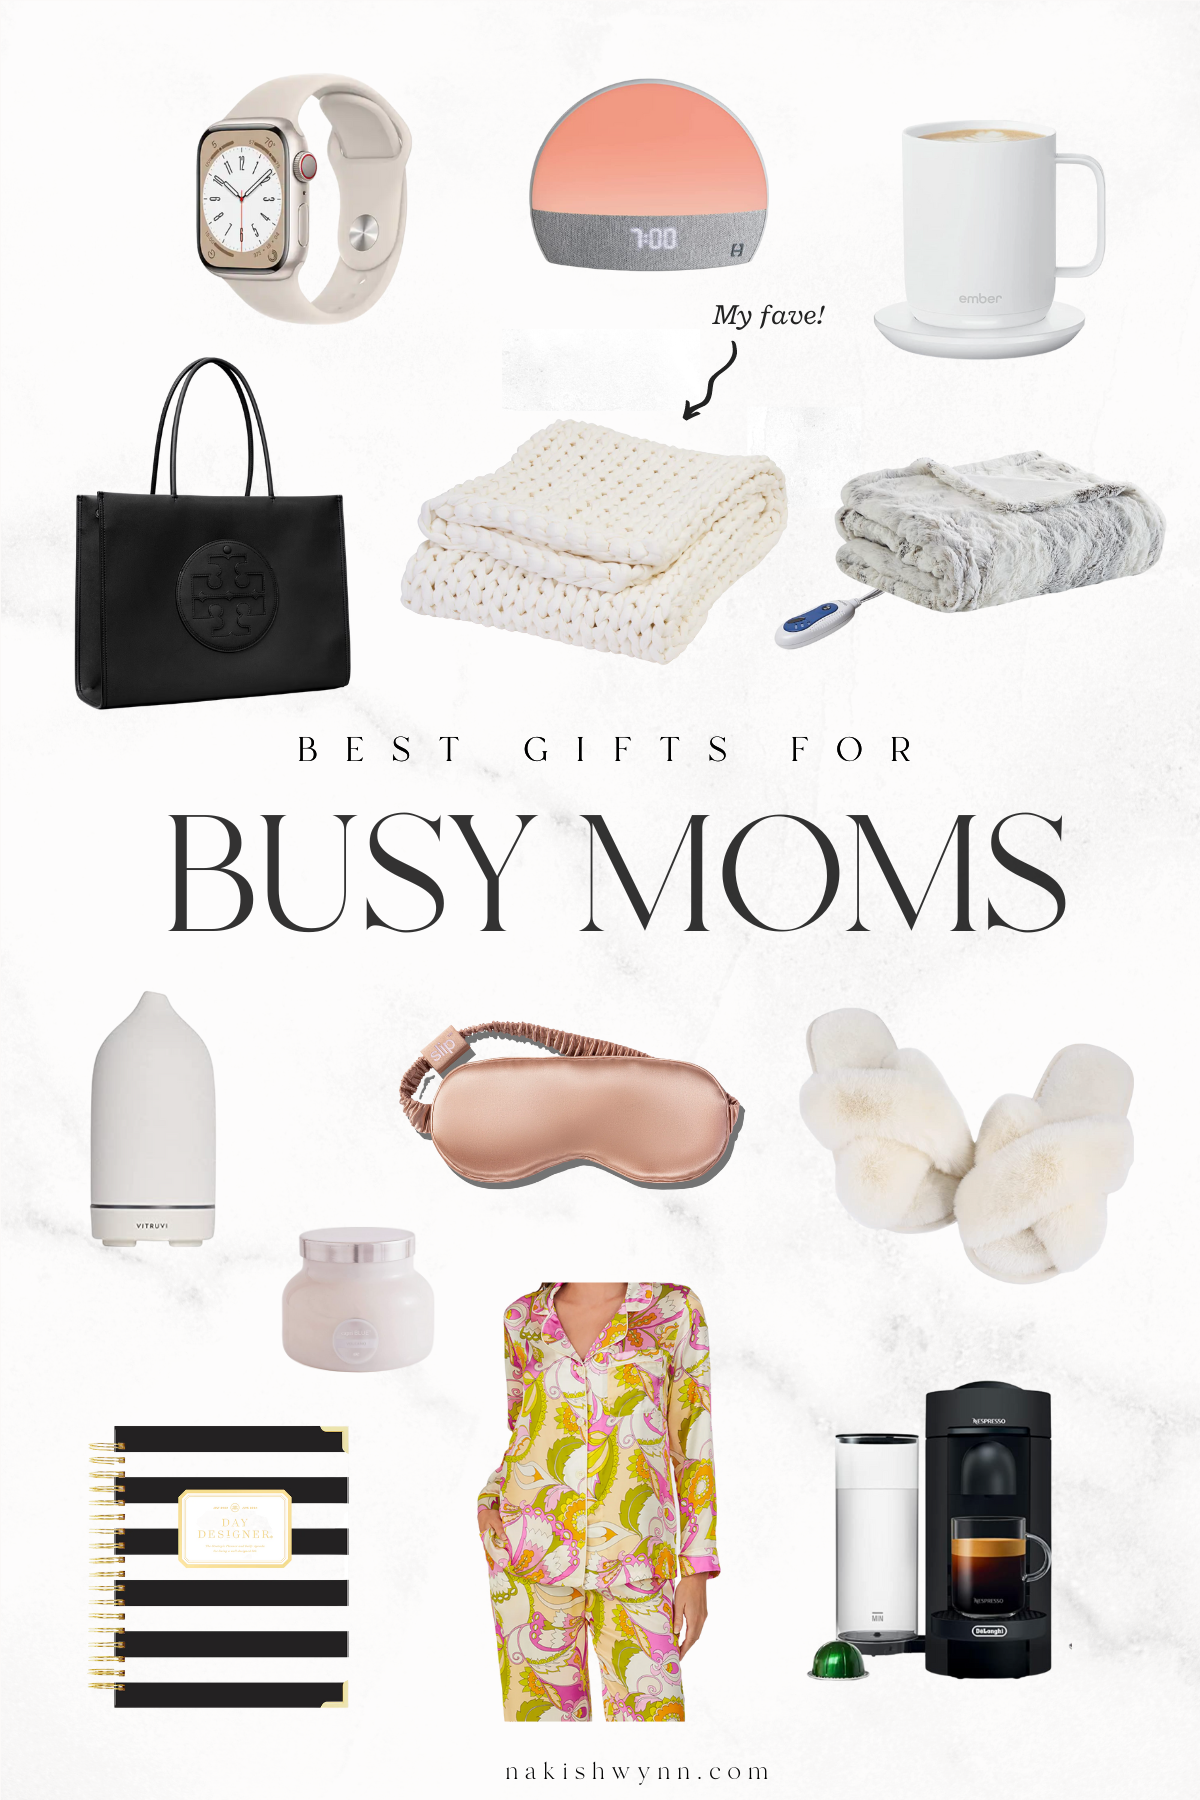 64 Thoughtful Gifts and Craft Ideas to Make for Mom - FeltMagnet-sonthuy.vn